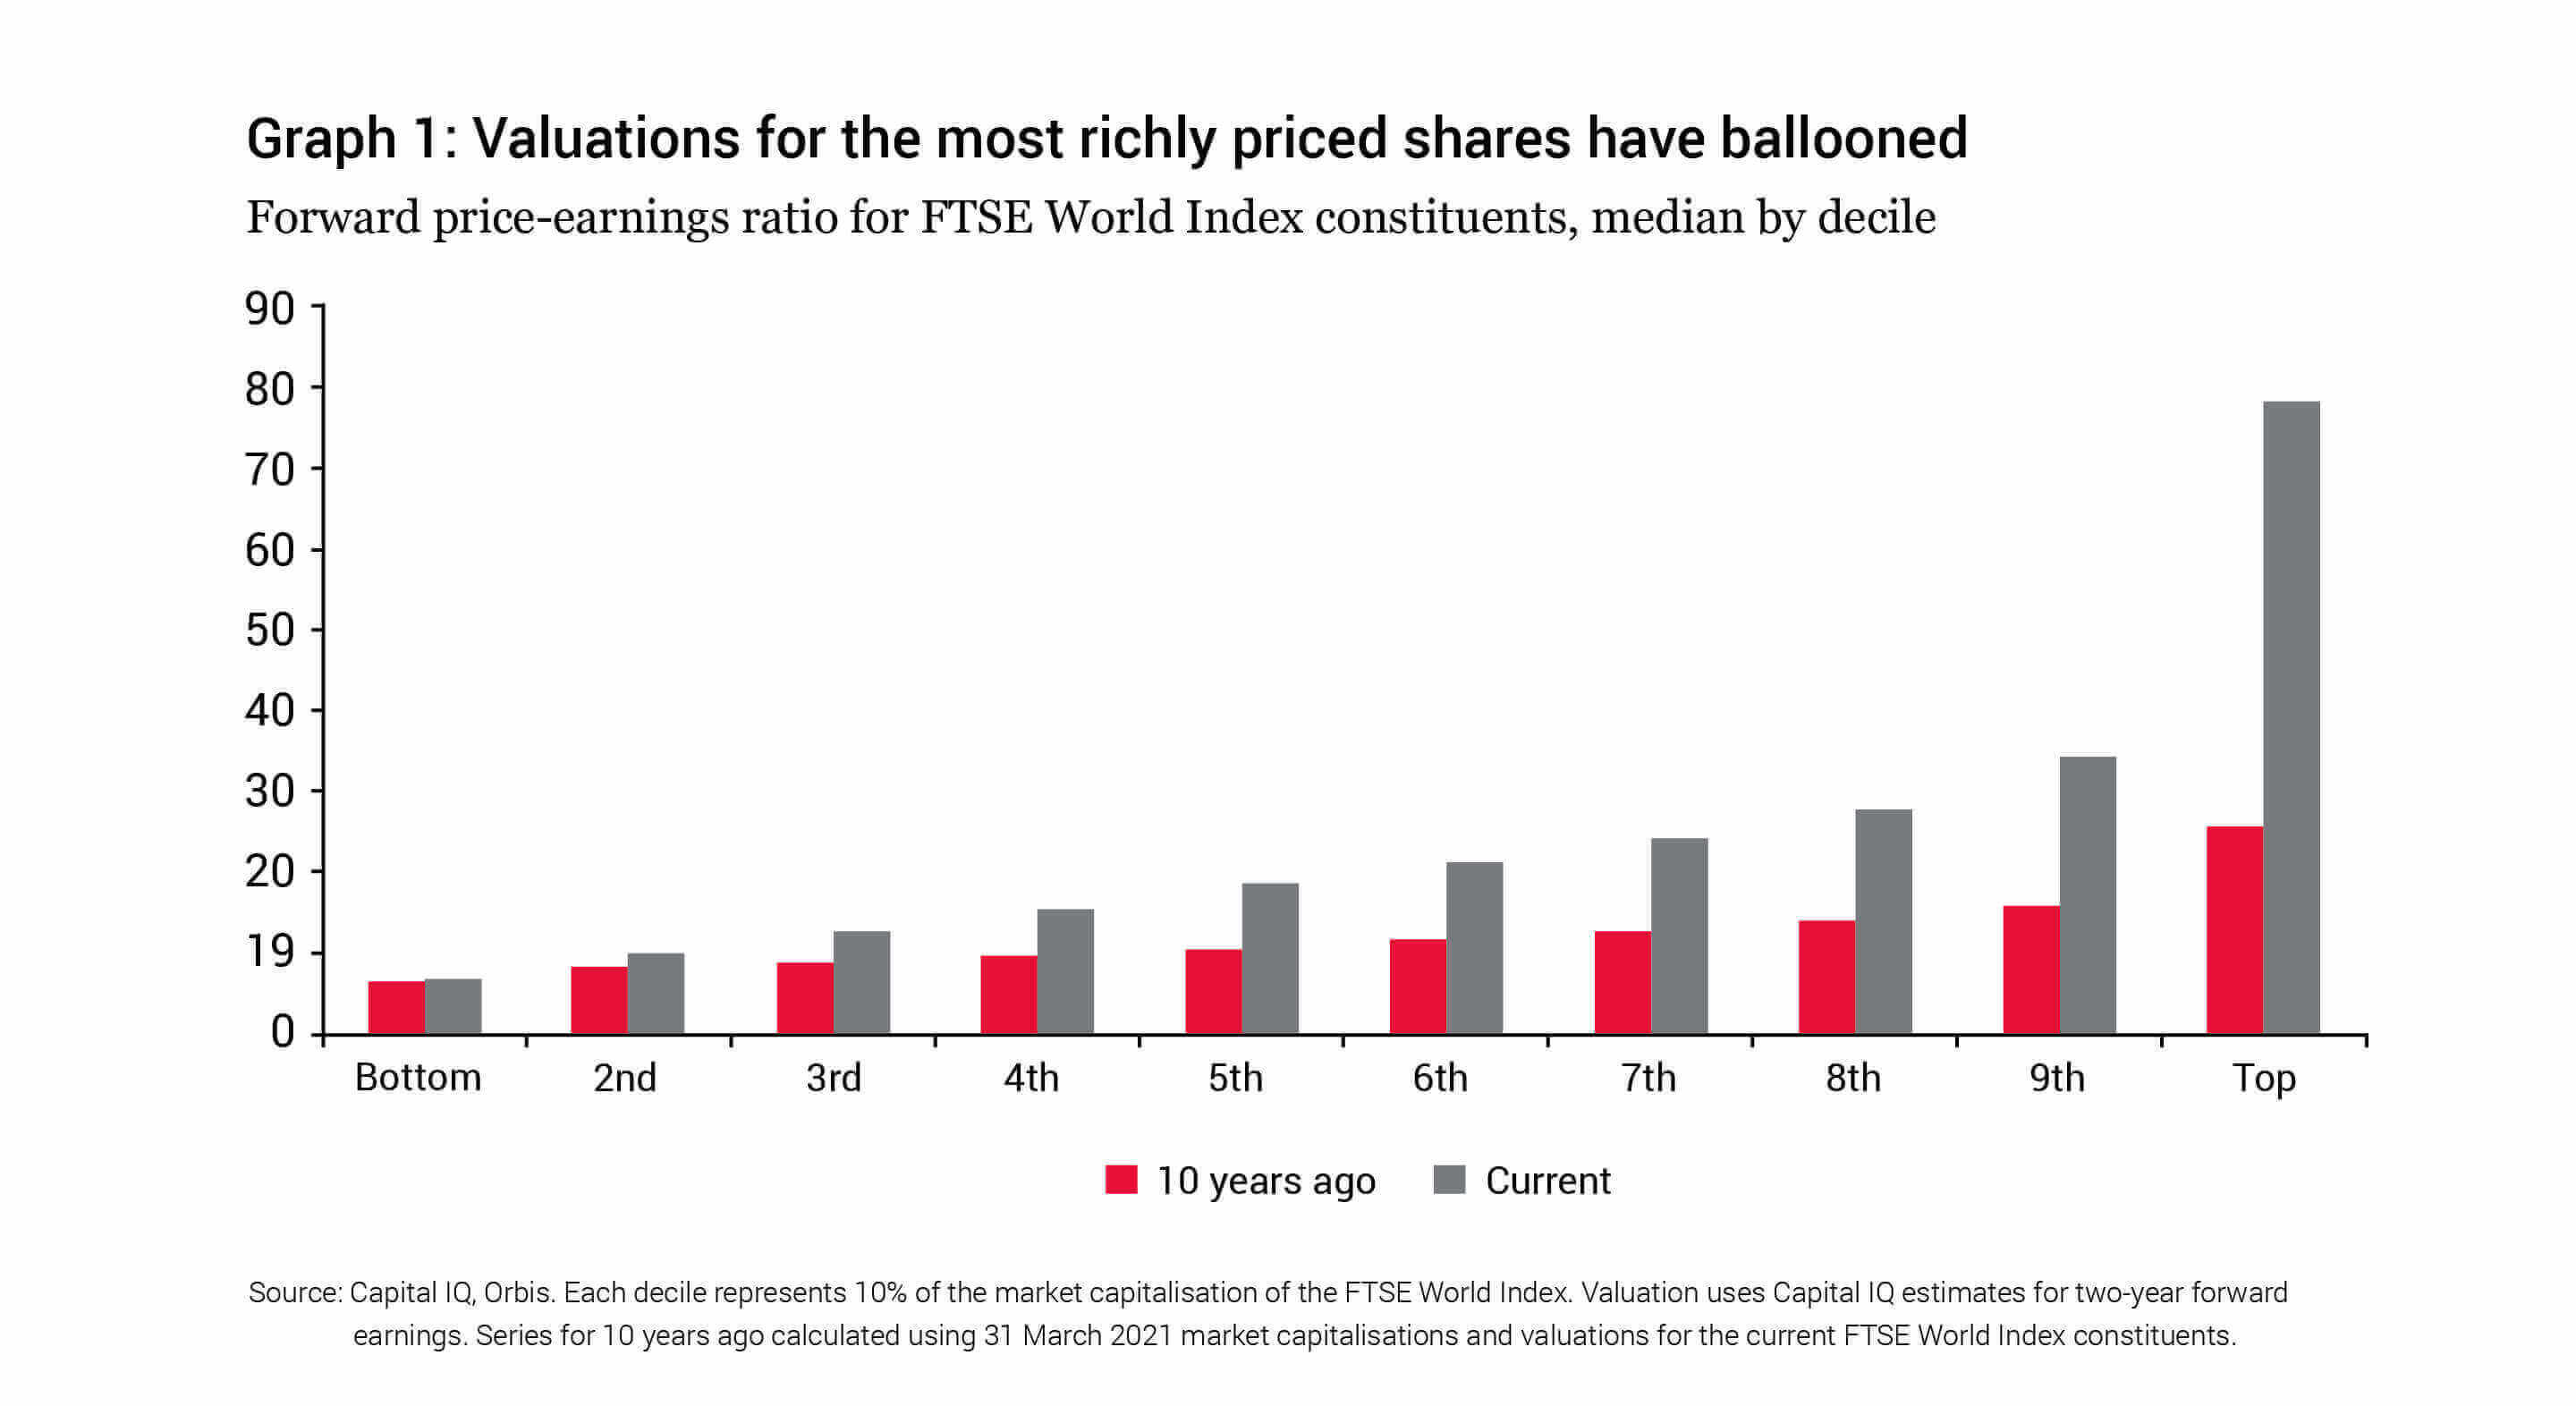 Valuations for the most richly priced shares have ballooned - Allan Gray